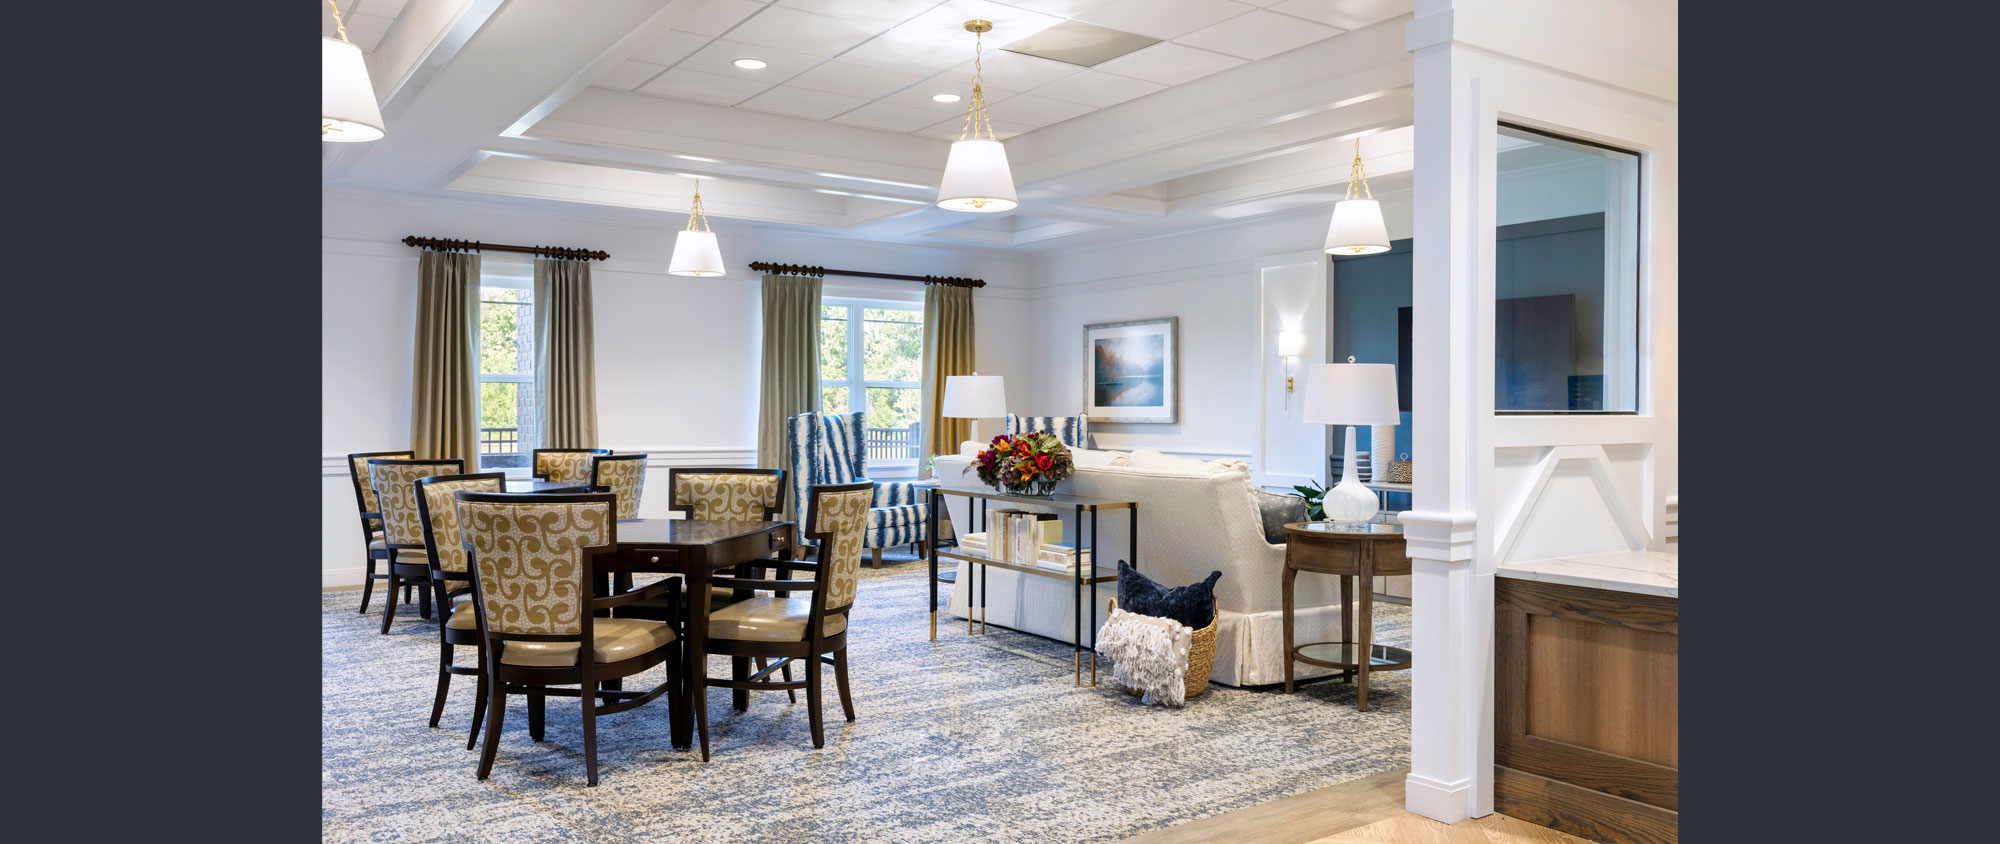 Vitality Living at Upland Park